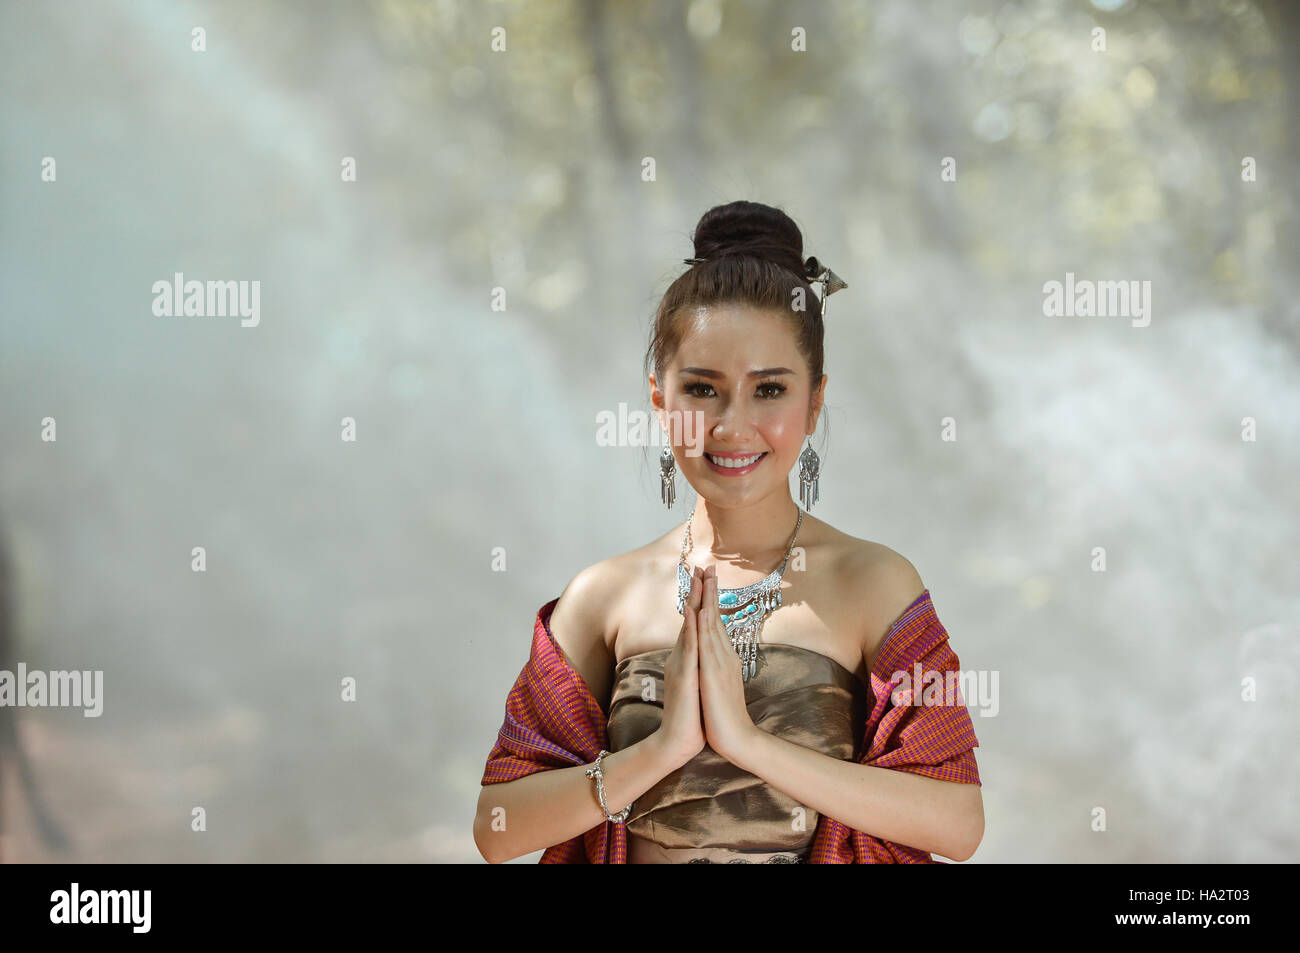 Portrait of a woman with hands in prayer position, Thailand Stock Photo